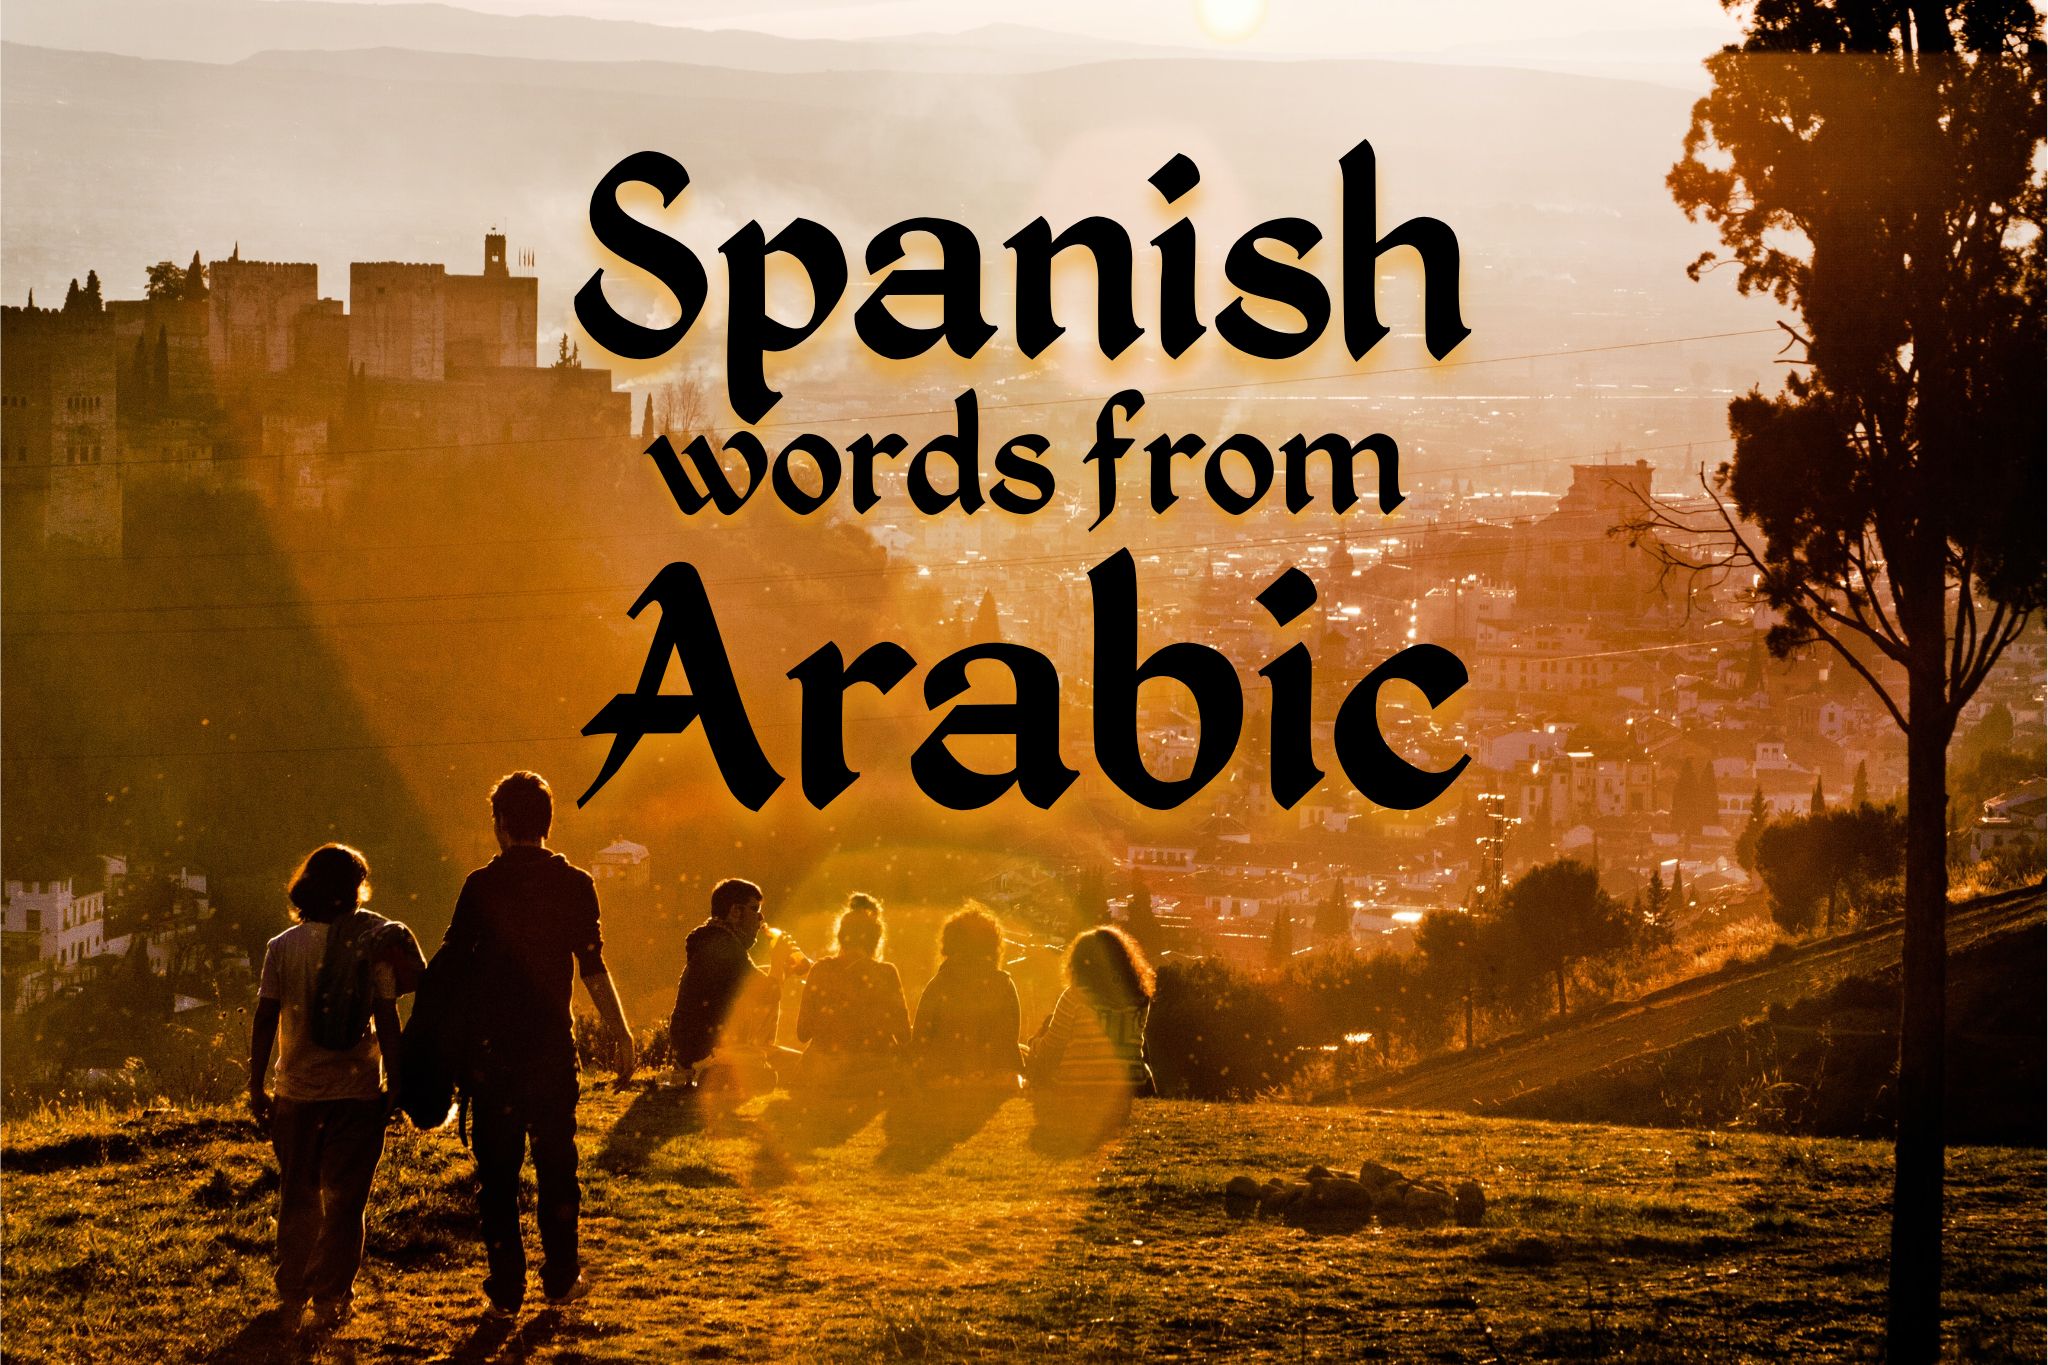 Spanish words from Arabic